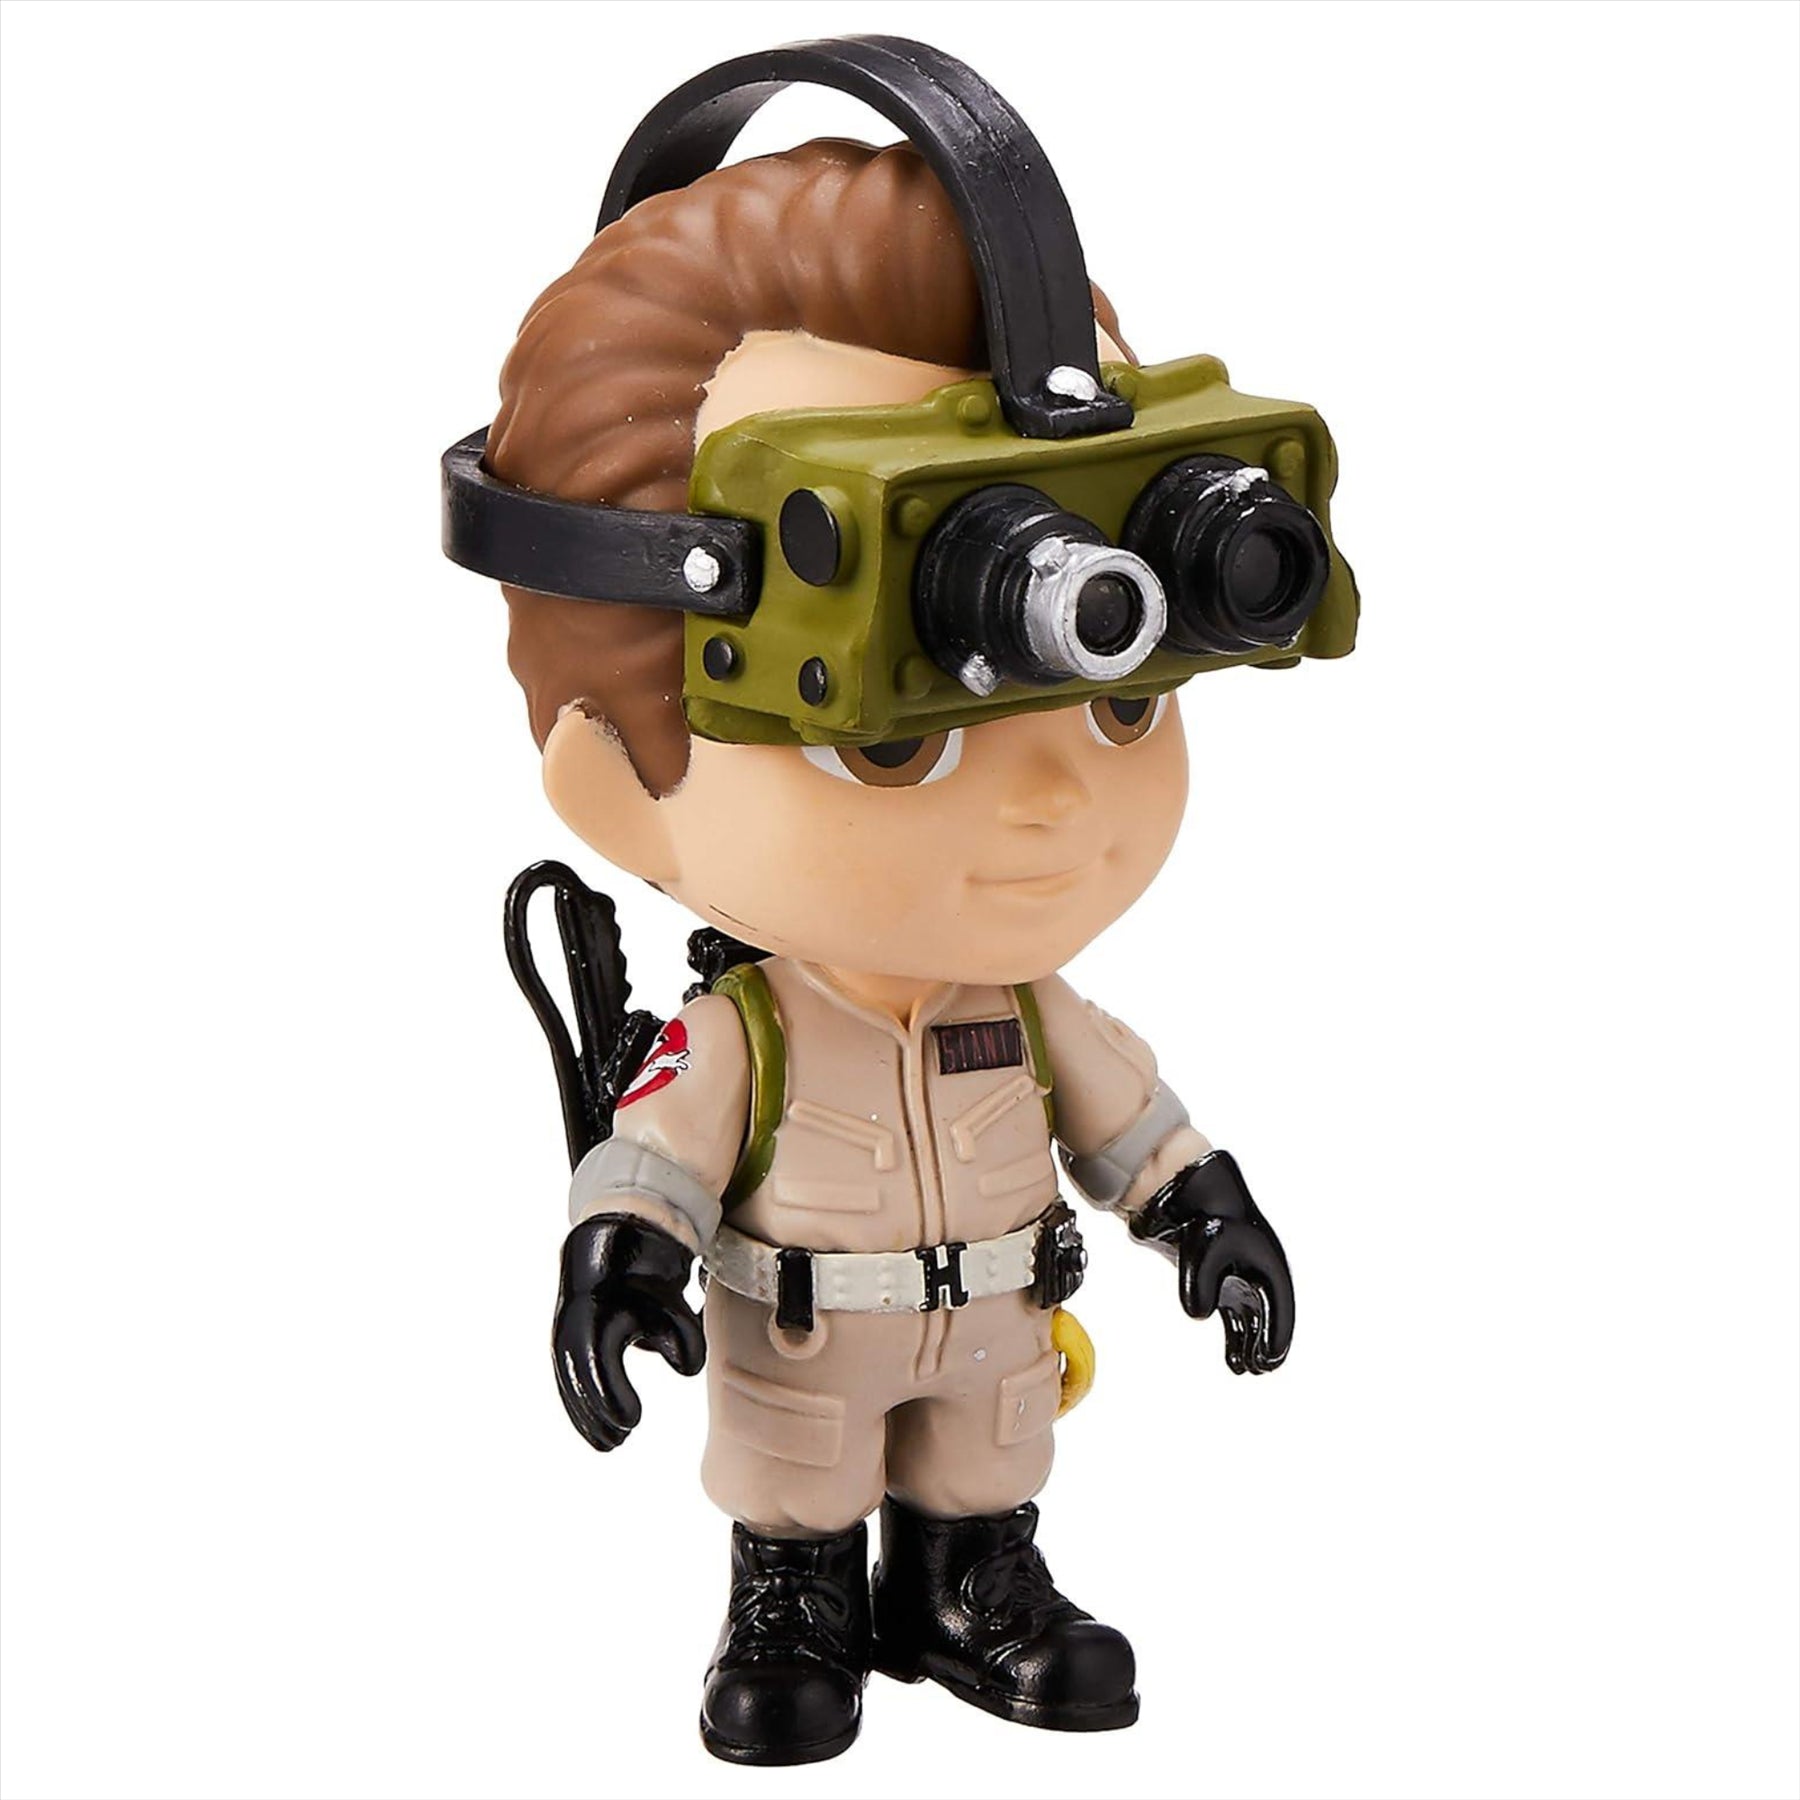 Funko! Five Star Ghostbusters Collectable Vinyl Figures, Official Merchandise - Dr. Raymond Stantz, Winston Zeddemore and Dr. Peter Venkman - 3 Pack - Toptoys2u